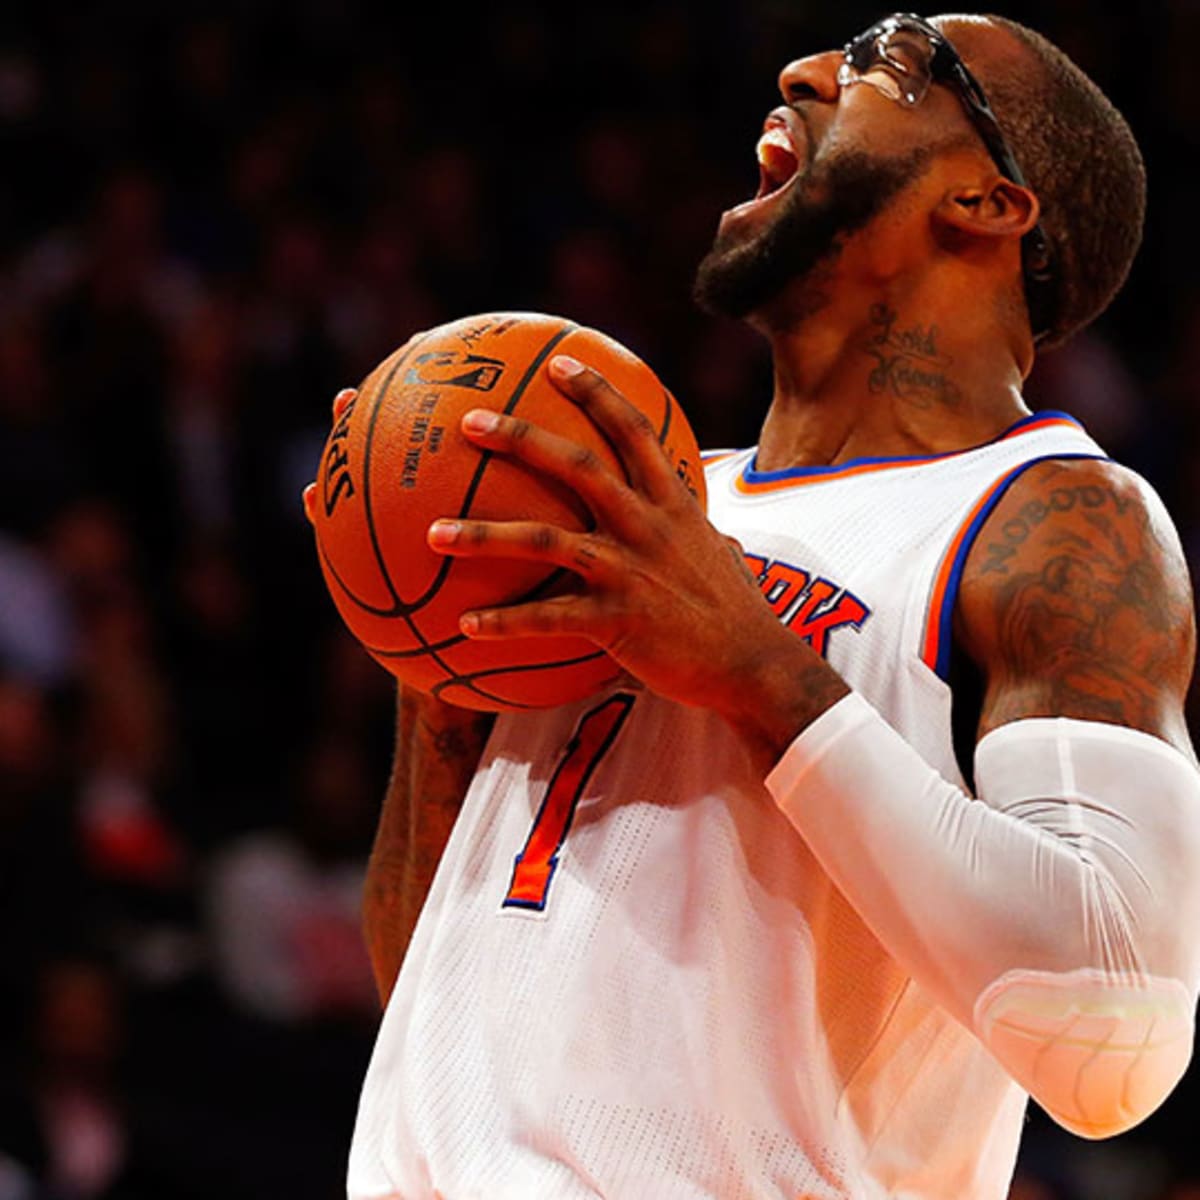 Why Amar'e Stoudemire retired with the Knicks and not the Suns